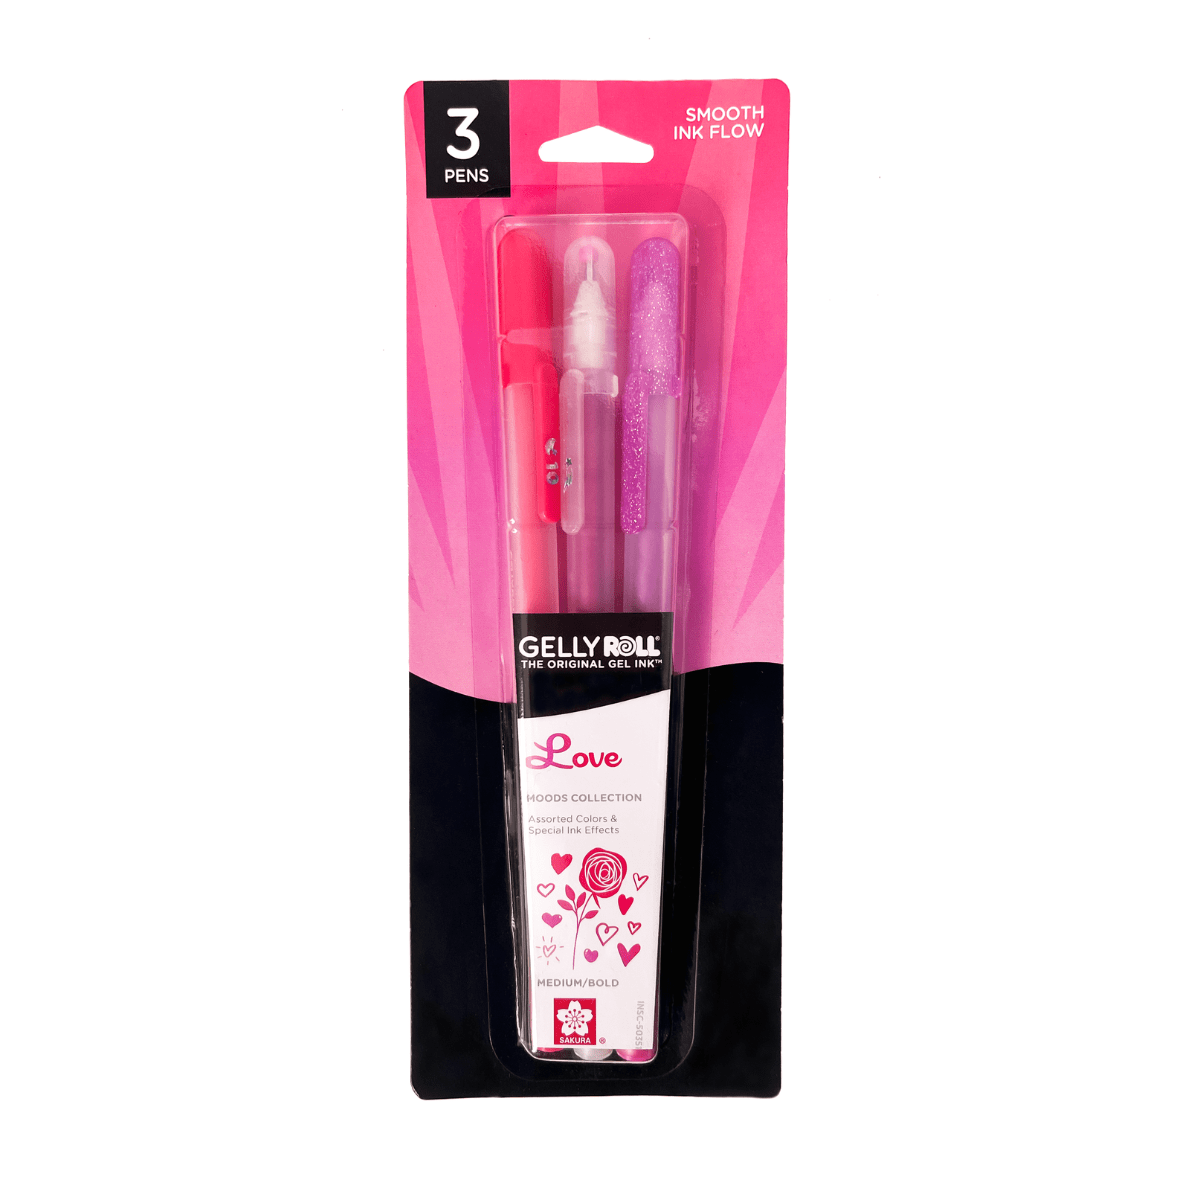 Pen Review: Gelly Roll 64-Piece Gel Pen Set - The Well-Appointed Desk